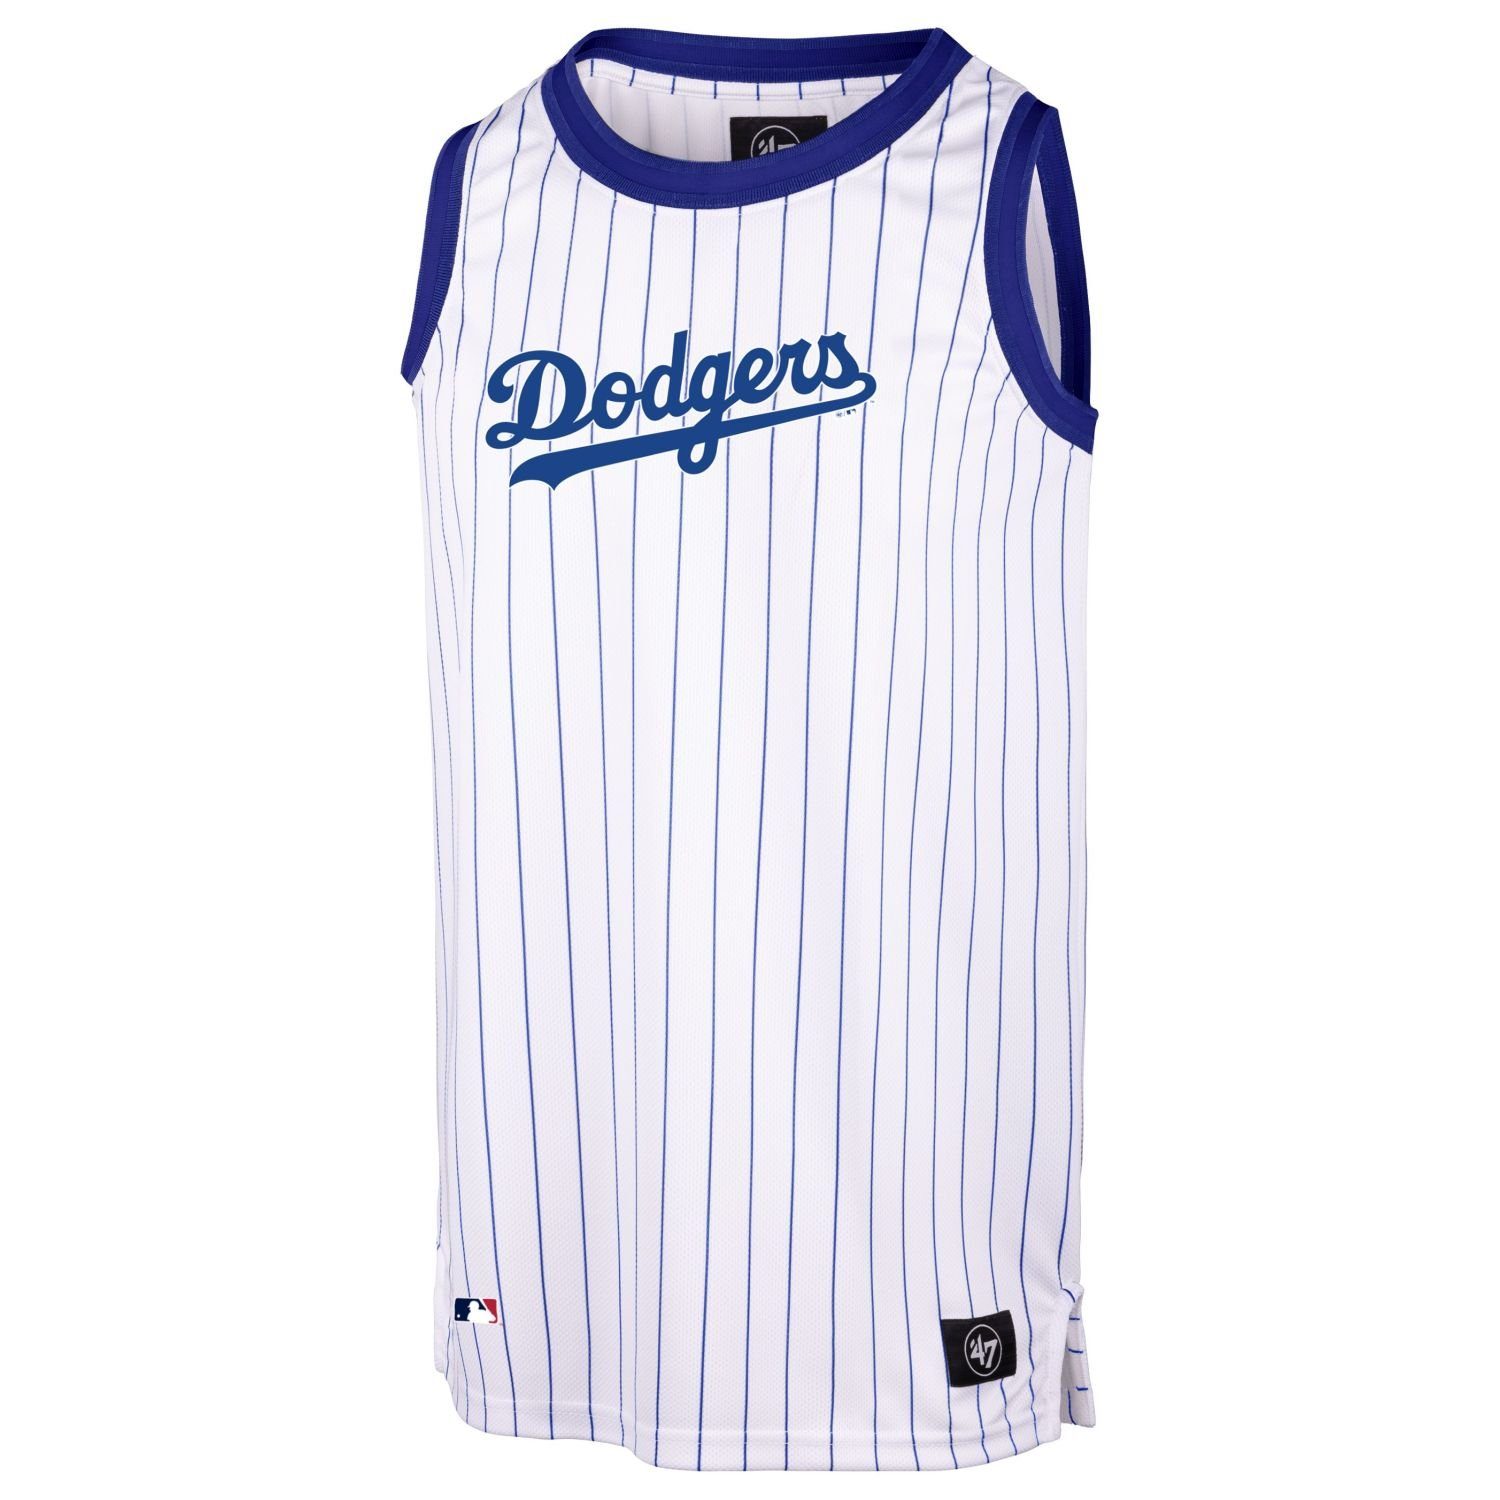 '47 Brand Muskelshirt PINSTRIPED Los Angeles Dodgers